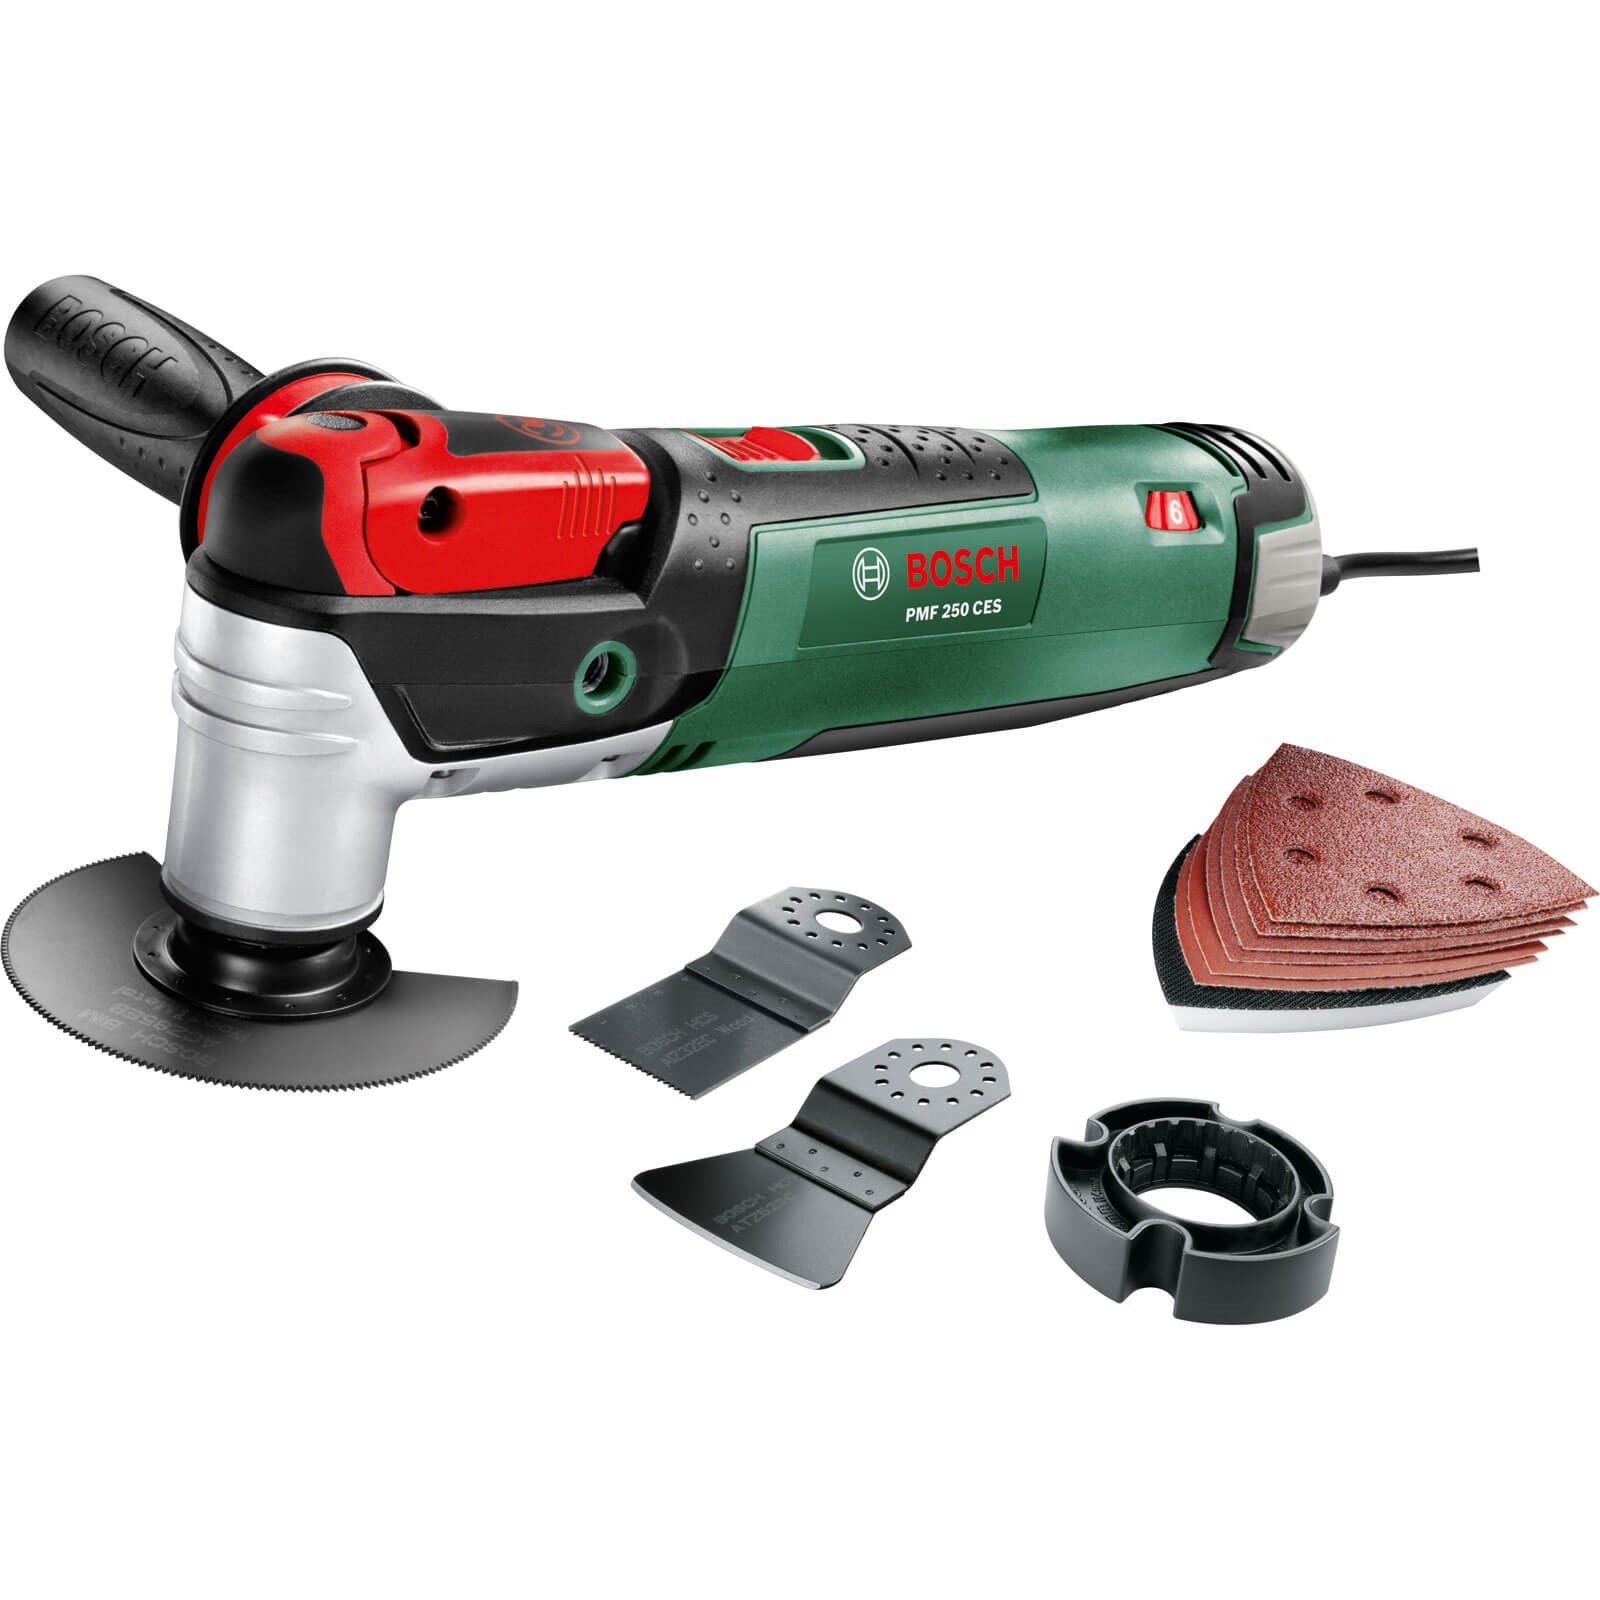 Bosch PMF 250 CES All Rounder 3 In 1 Oscillating Multi Tool